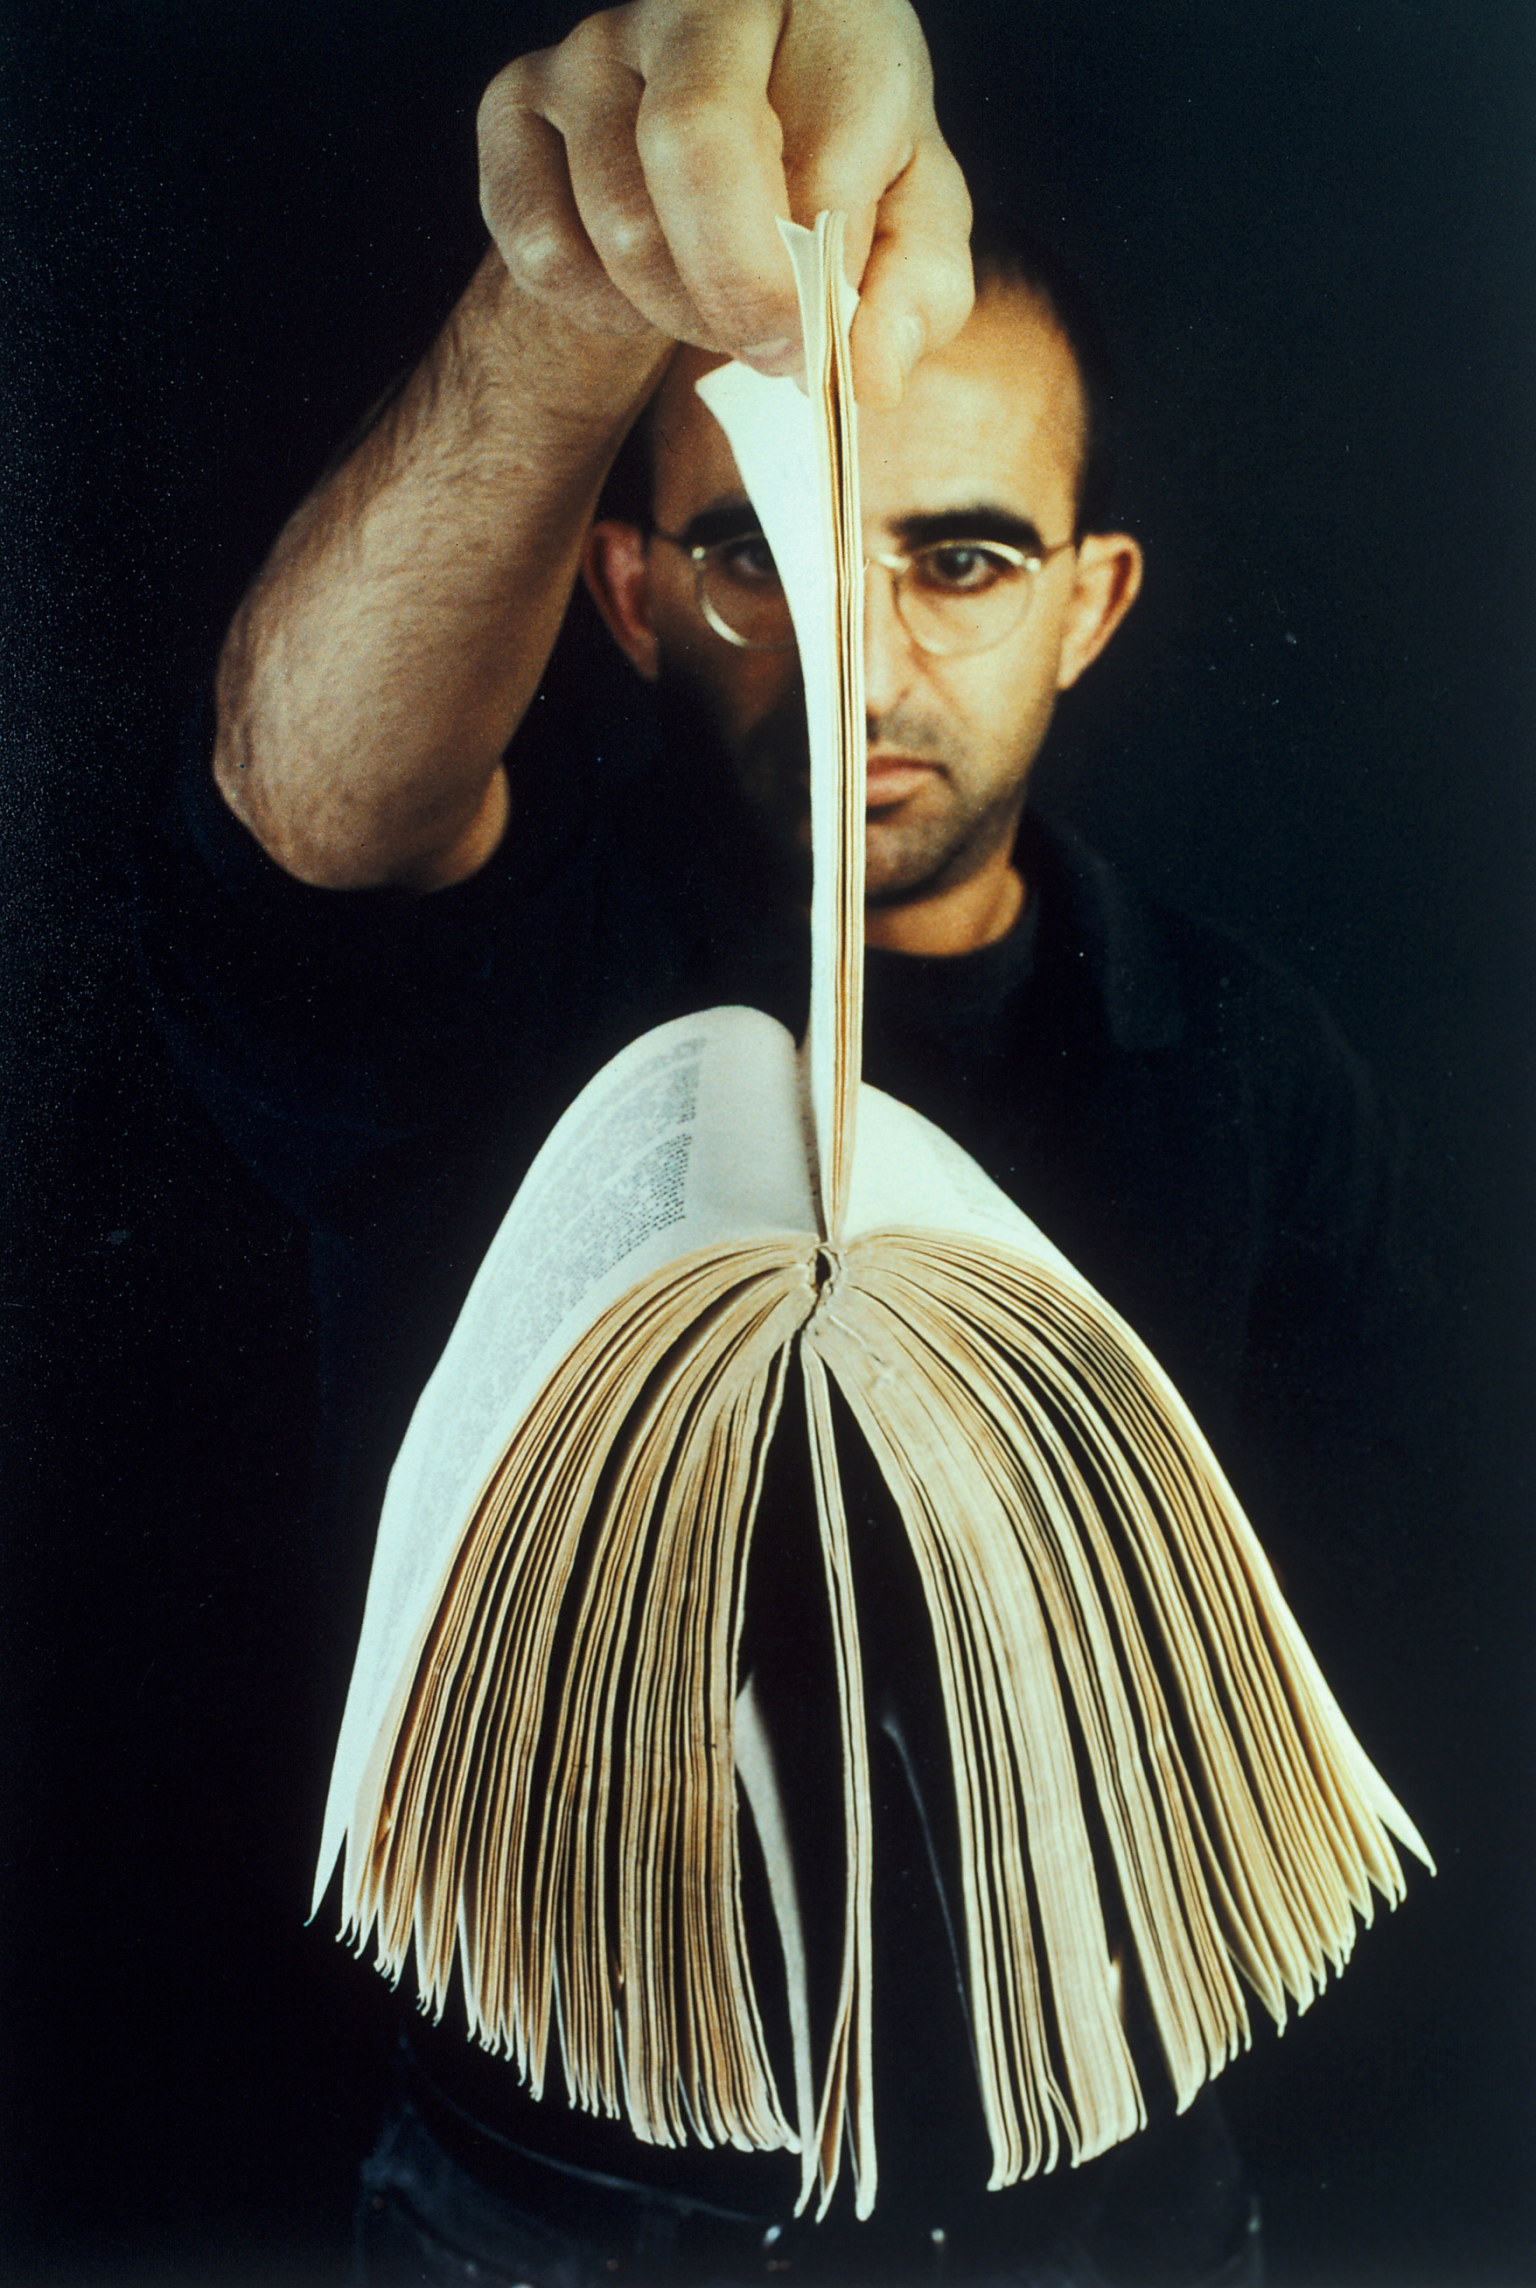 Photograph showing man facing camera and holding up a book by its pages.